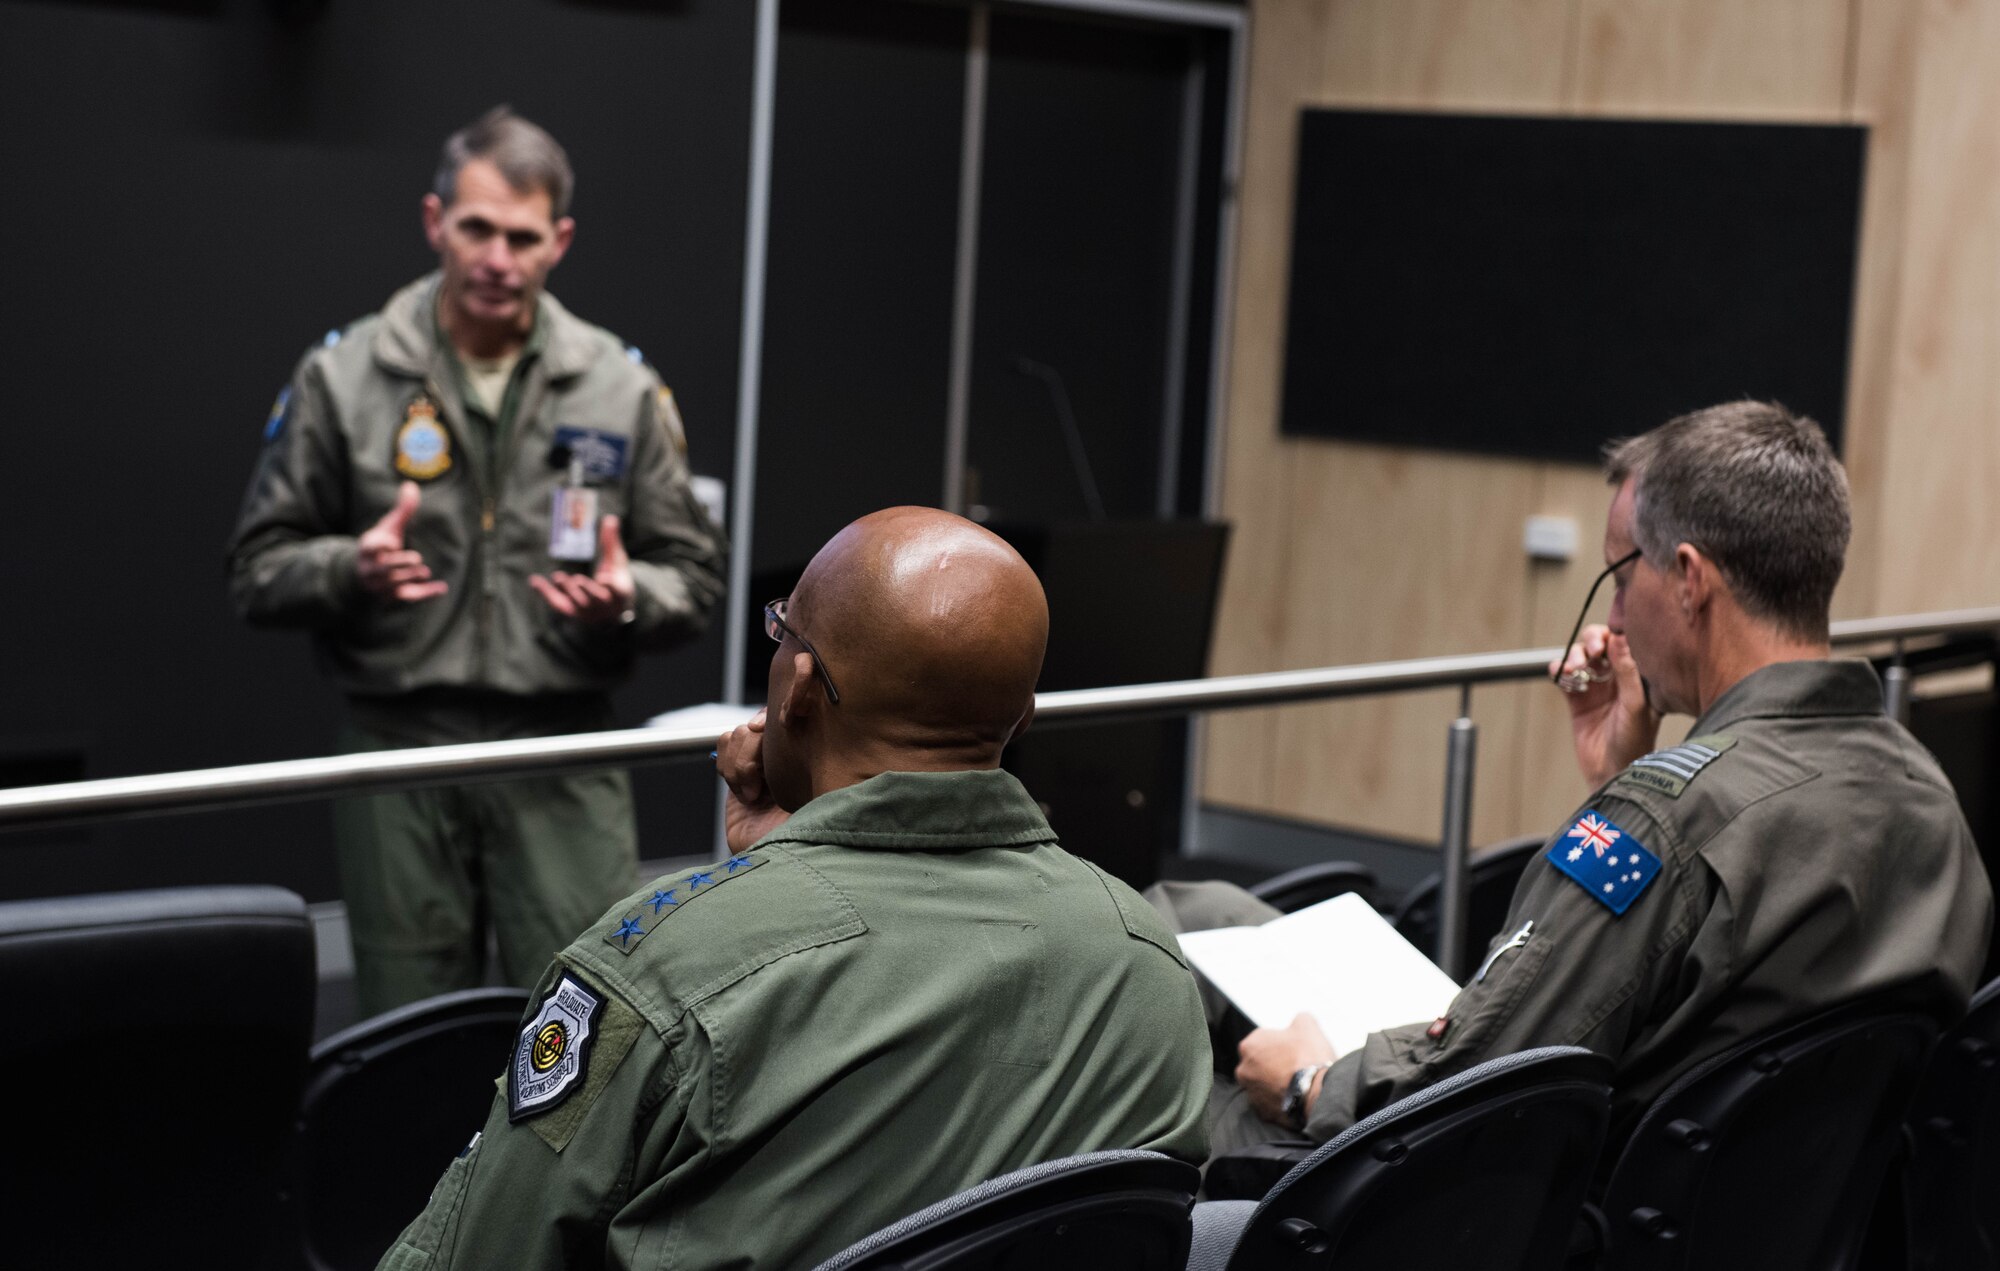 Gen. CQ Brown, Jr., Pacific Air Forces commander, attends a briefing by Air Commodore Rob Chipman, General Capability Planning director, at Royal Australian Air Force (RAAF) Base Williamtown, Australia, Aug. 9, 2018. His first trip to the region since taking command on July 26, 2018, Brown also met with key defense and military leaders in Canberra and RAAF Bases Tindal and Darwin to see first-hand the strength of the U.S.-Australia alliance and discuss opportunities to ensure a free and open Indo-Pacific region. (U.S. Air Force photo by Staff Sgt. Hailey Haux)